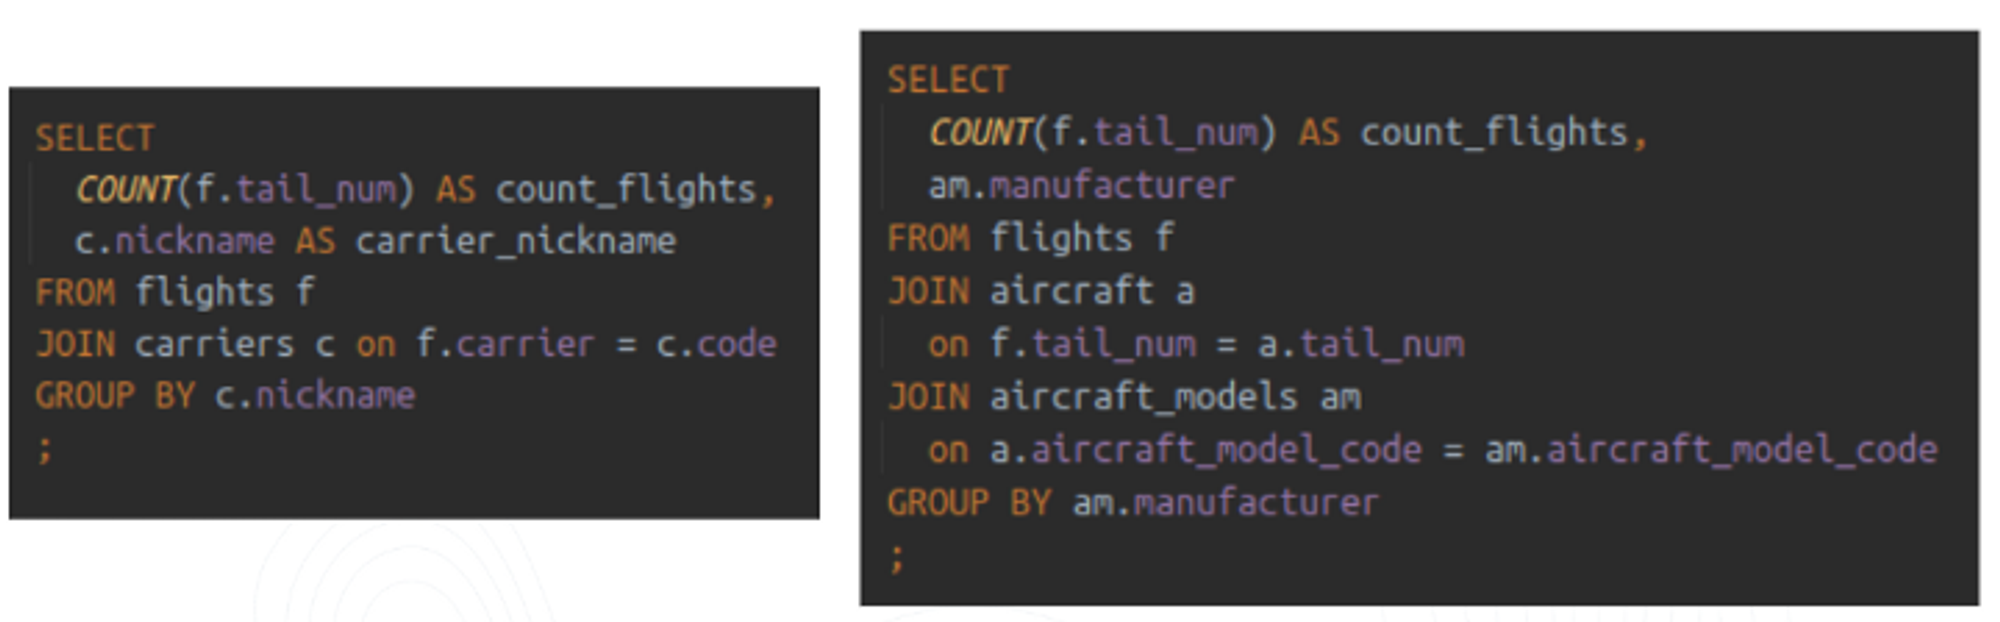 Count of flights by carrier OR by aircraft model manufacturer. The same metric (count of flights) in different contexts (Carrier / Aircraft model manufacturer) requires completely different queries.